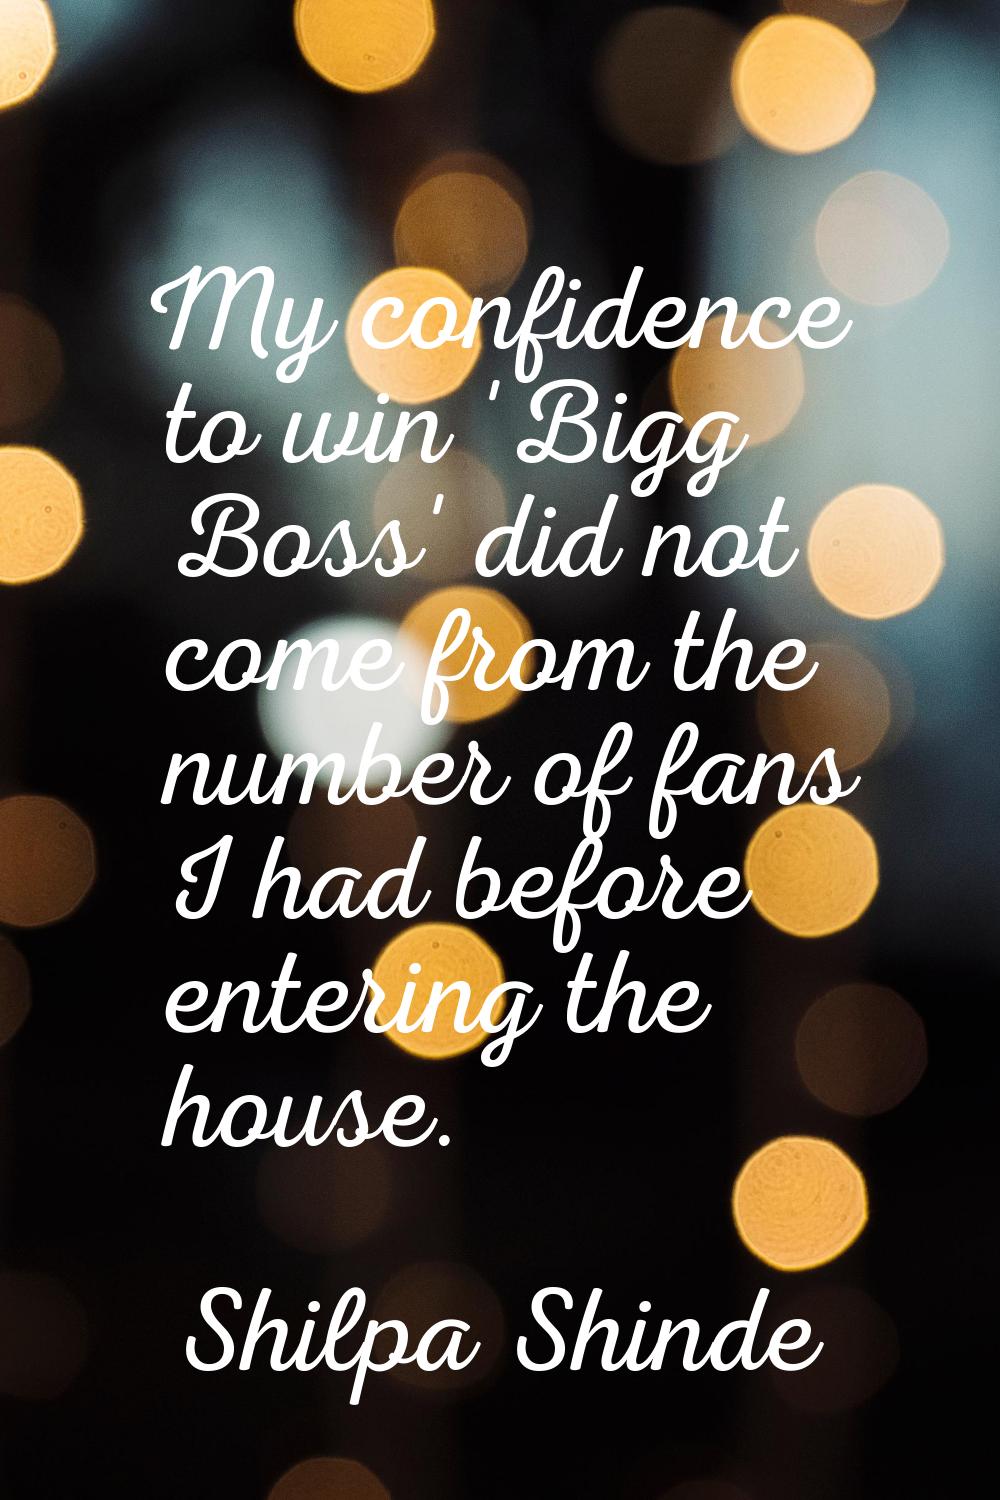 My confidence to win 'Bigg Boss' did not come from the number of fans I had before entering the hou